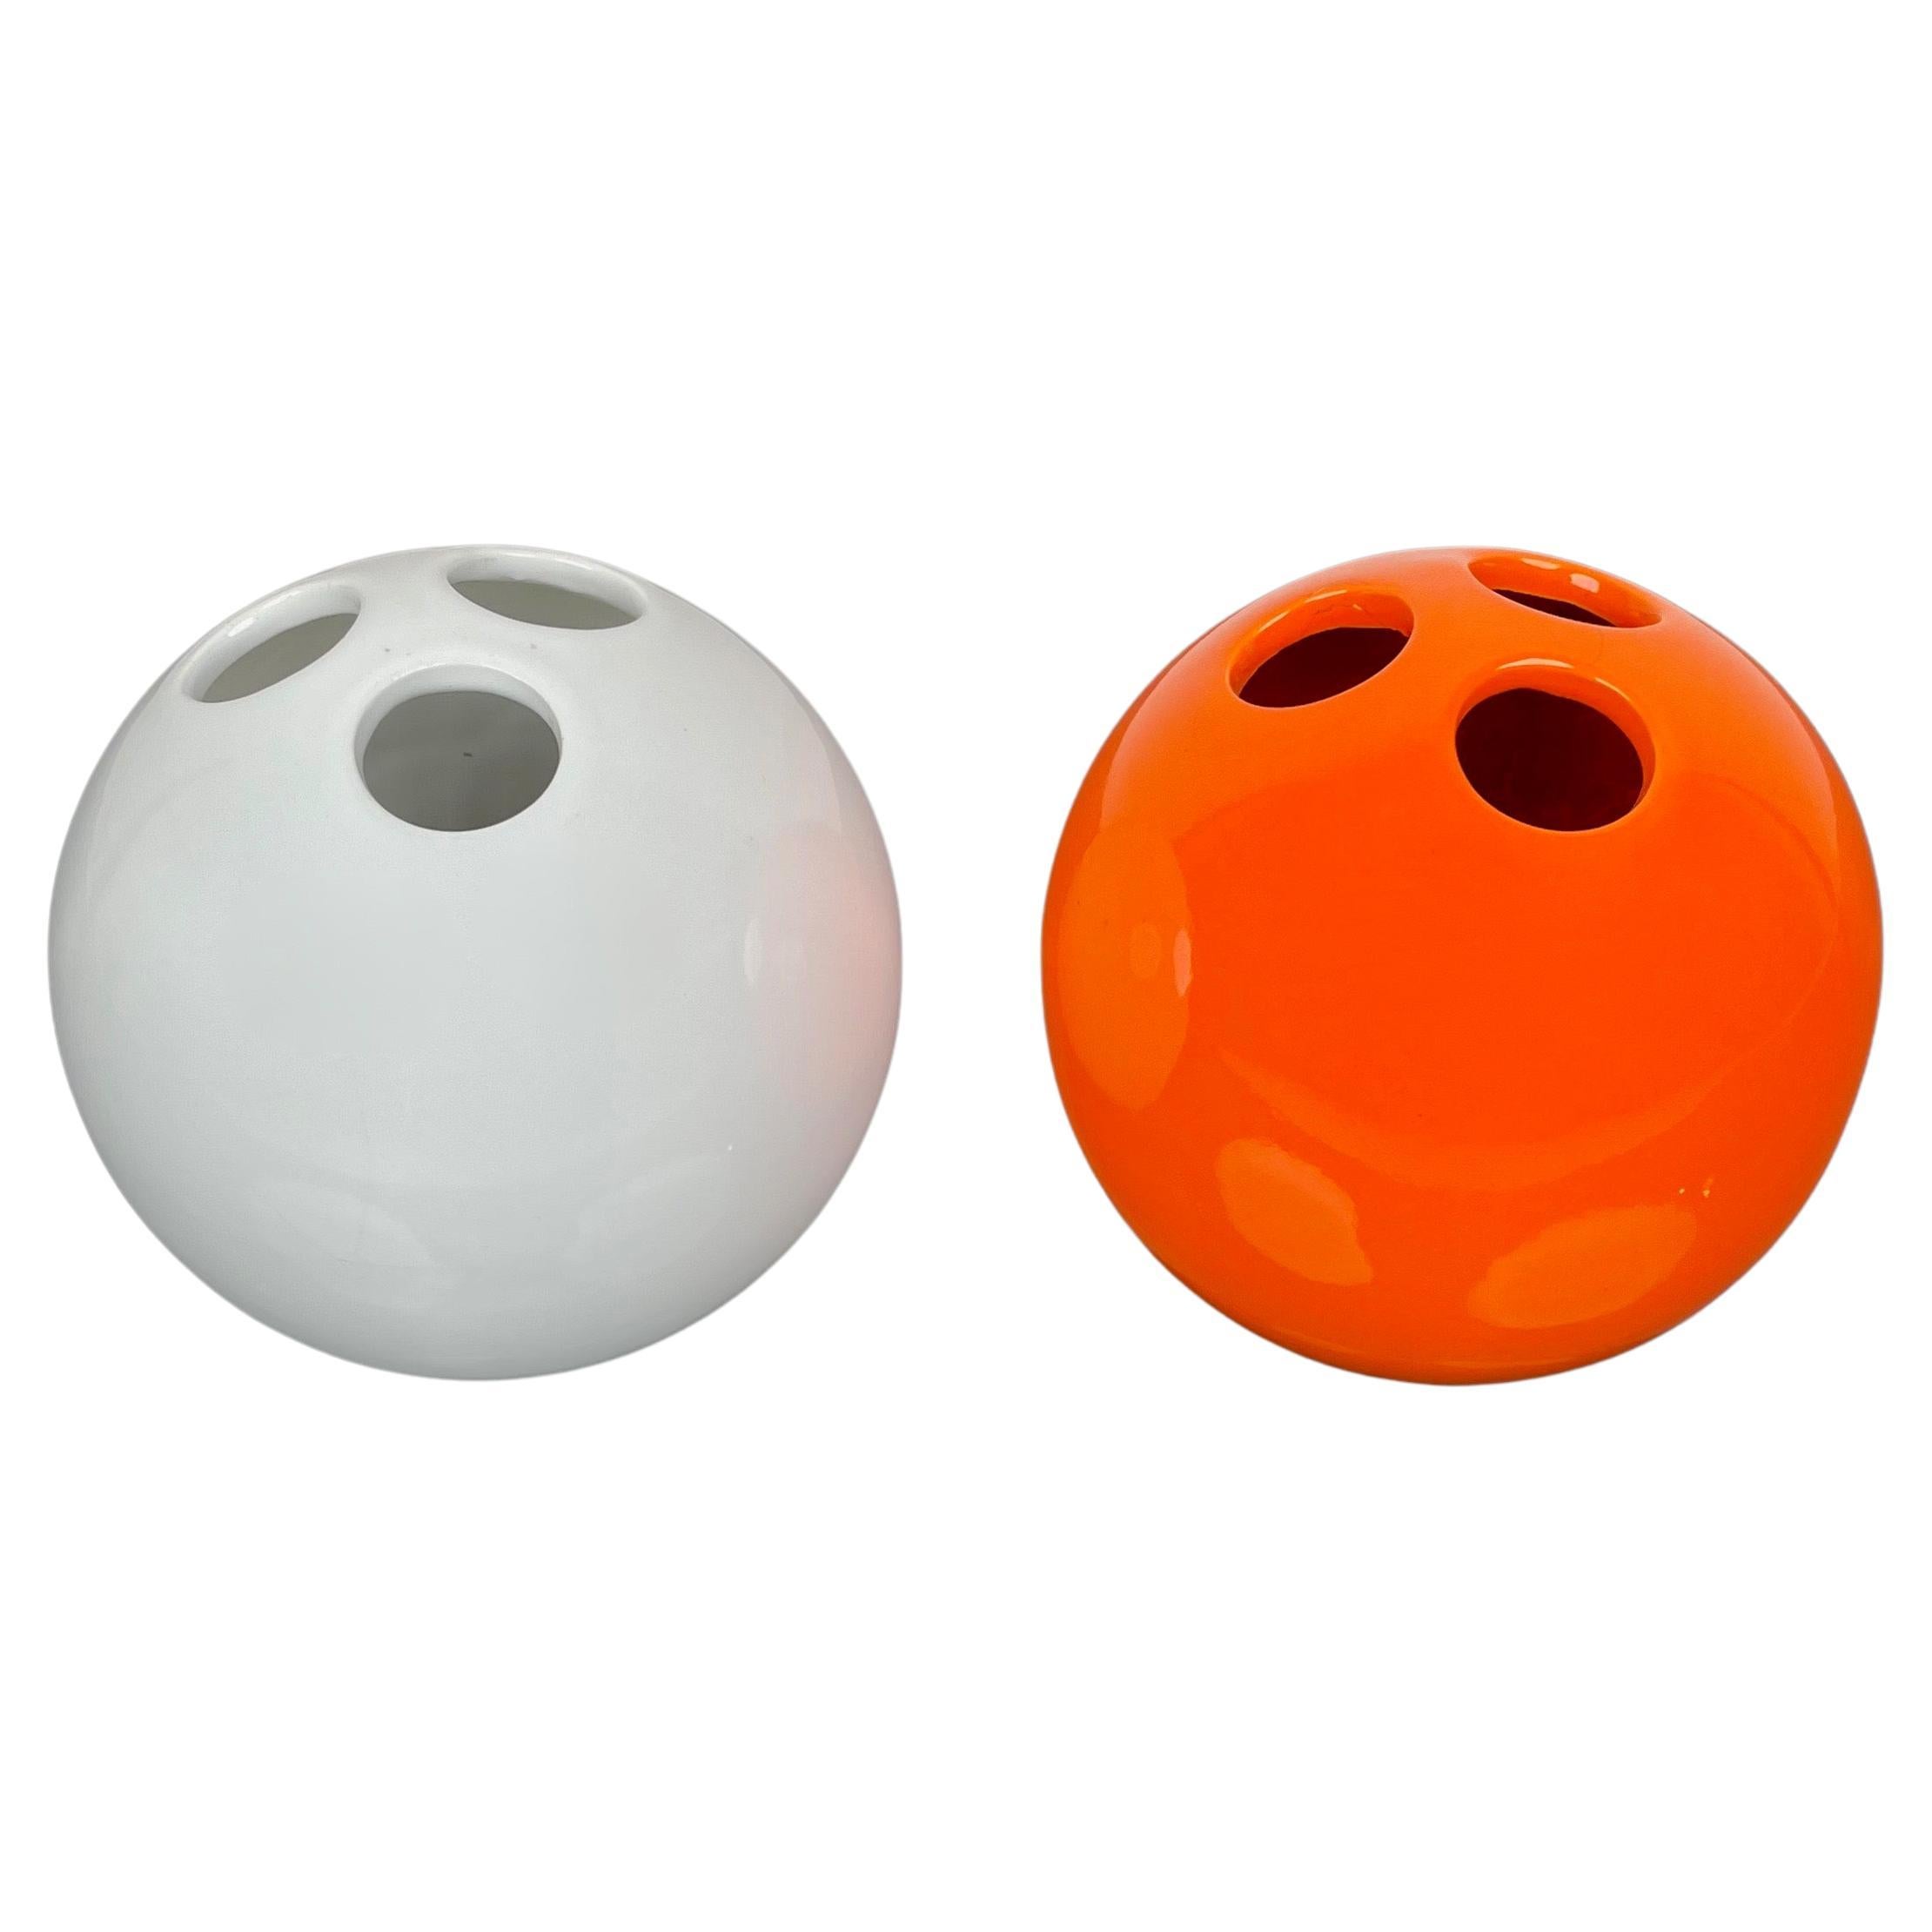 "Bowling Ball" Pair of Orange & White Ceramic Vase by Il Picchio, Italy 1970s